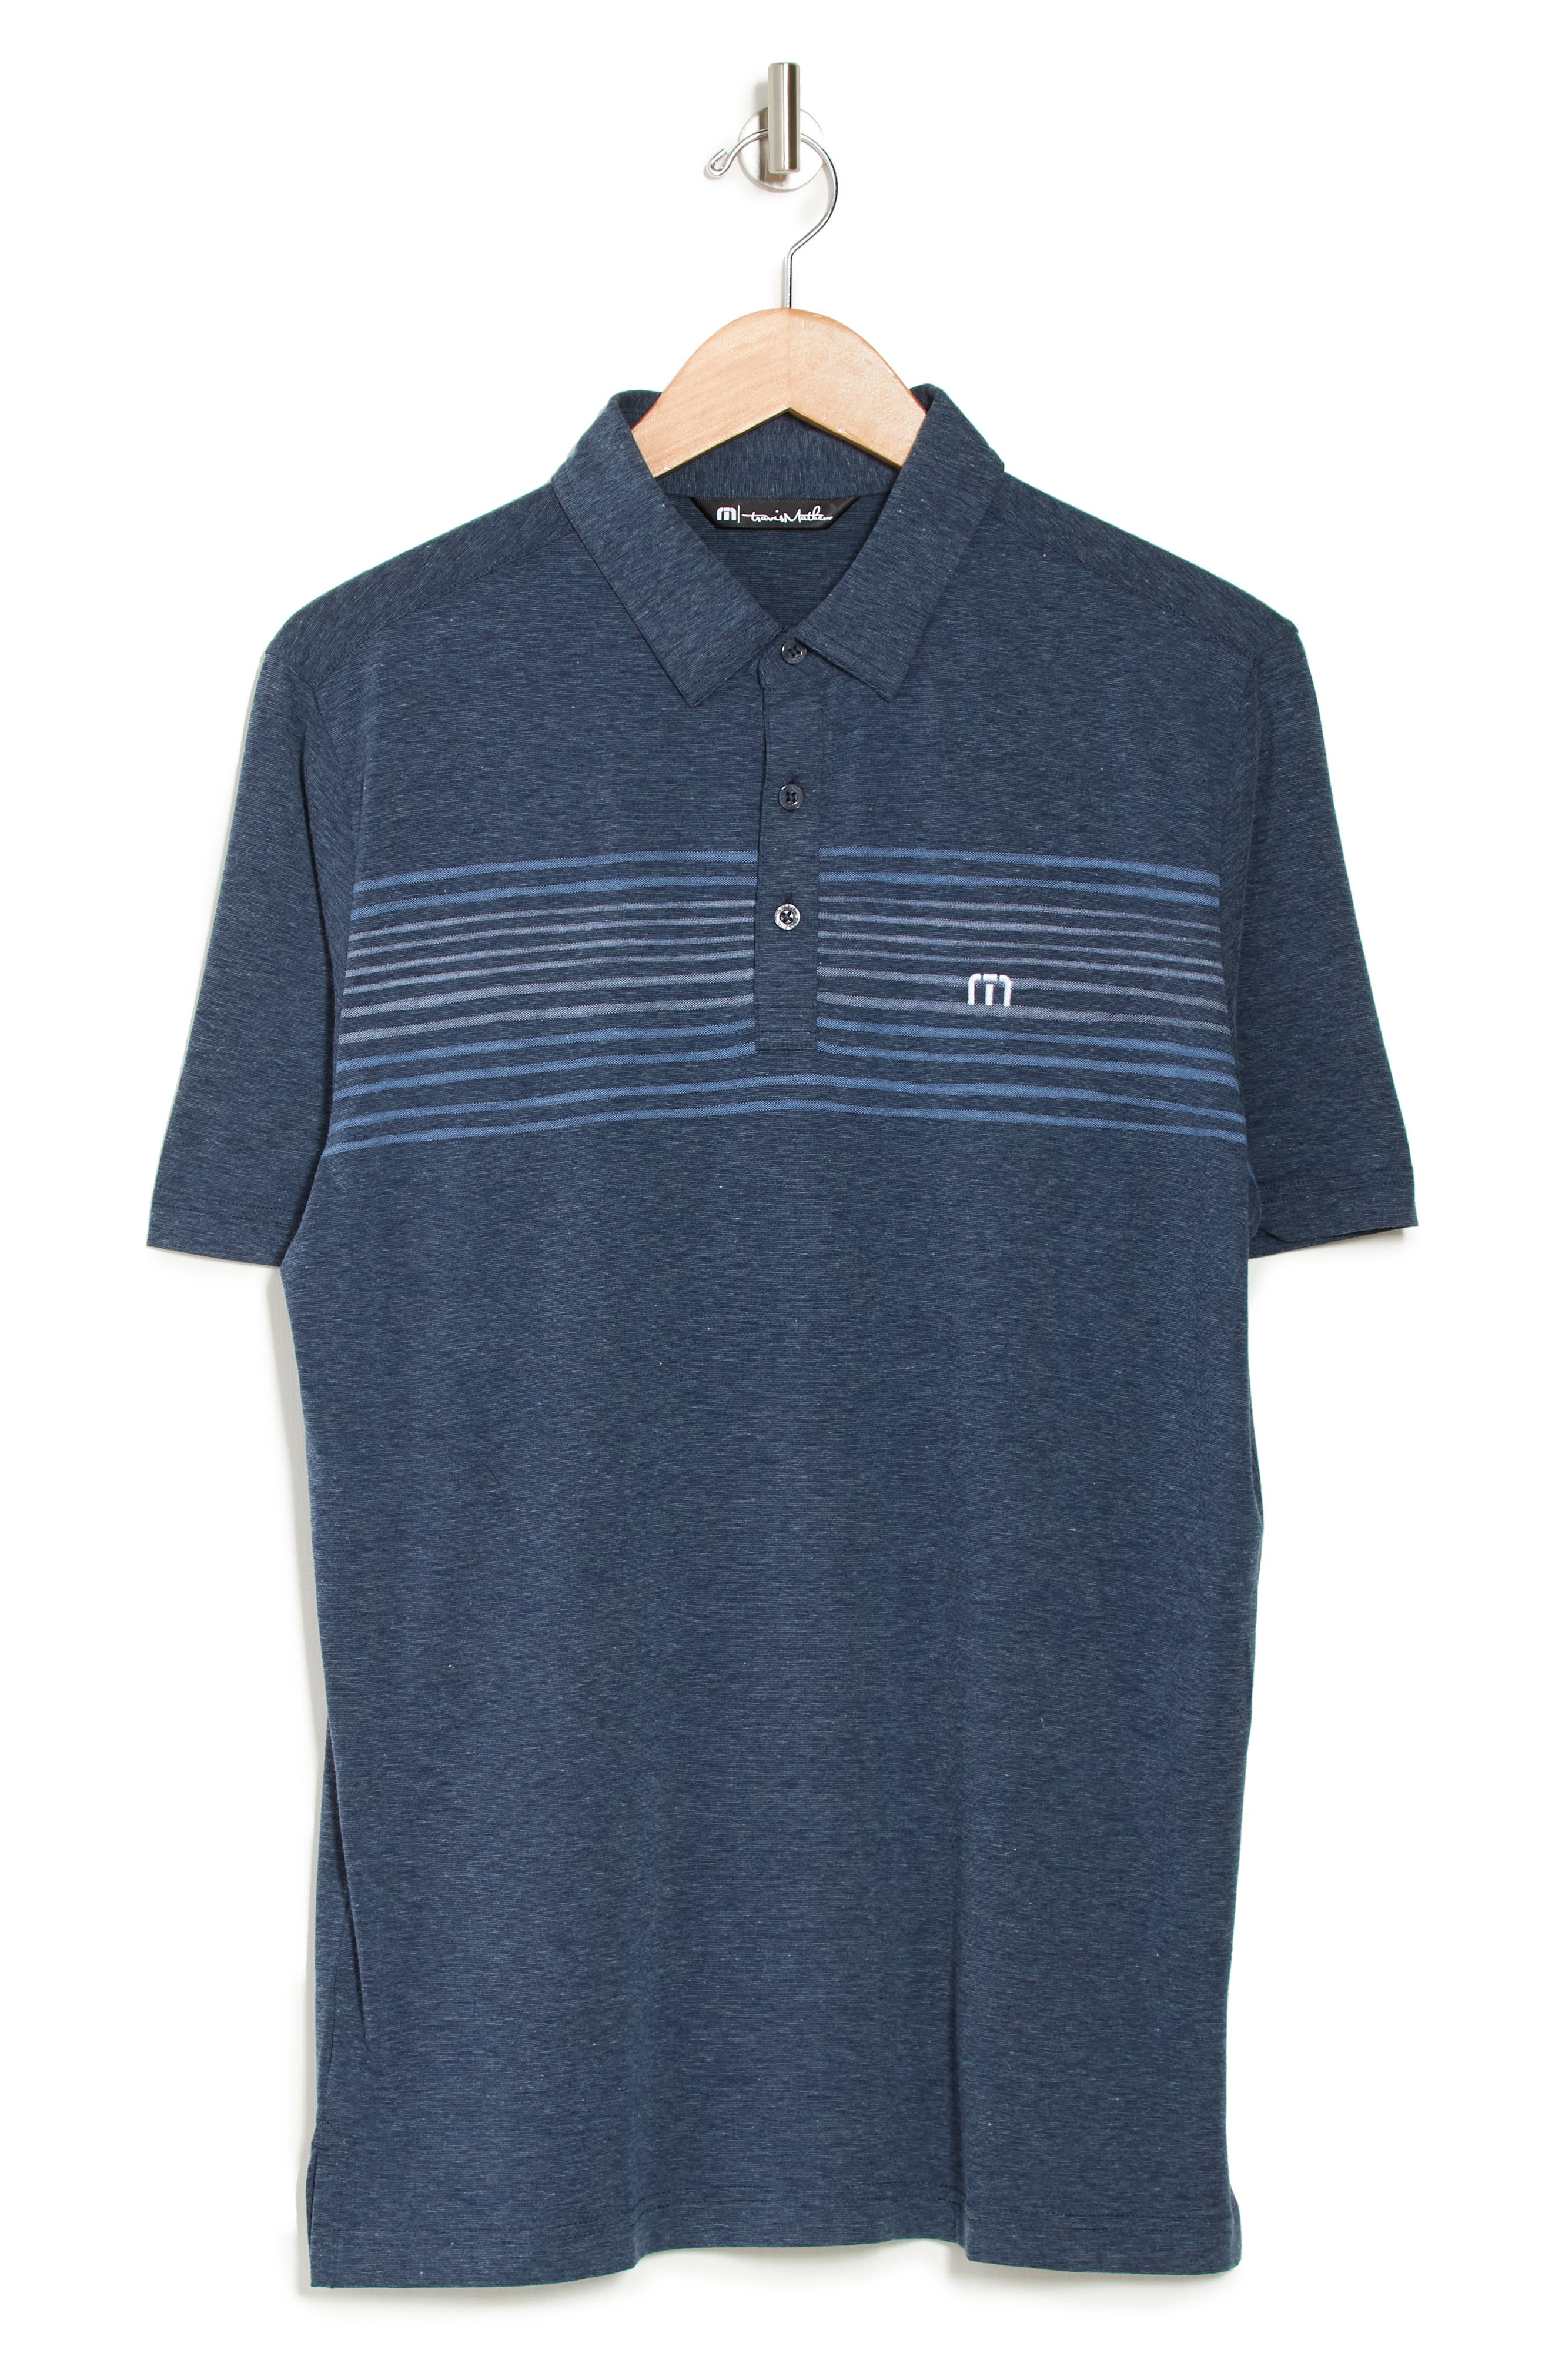 Travis Mathew Force Quit Short Sleeve Polo In Vin Ind Blk